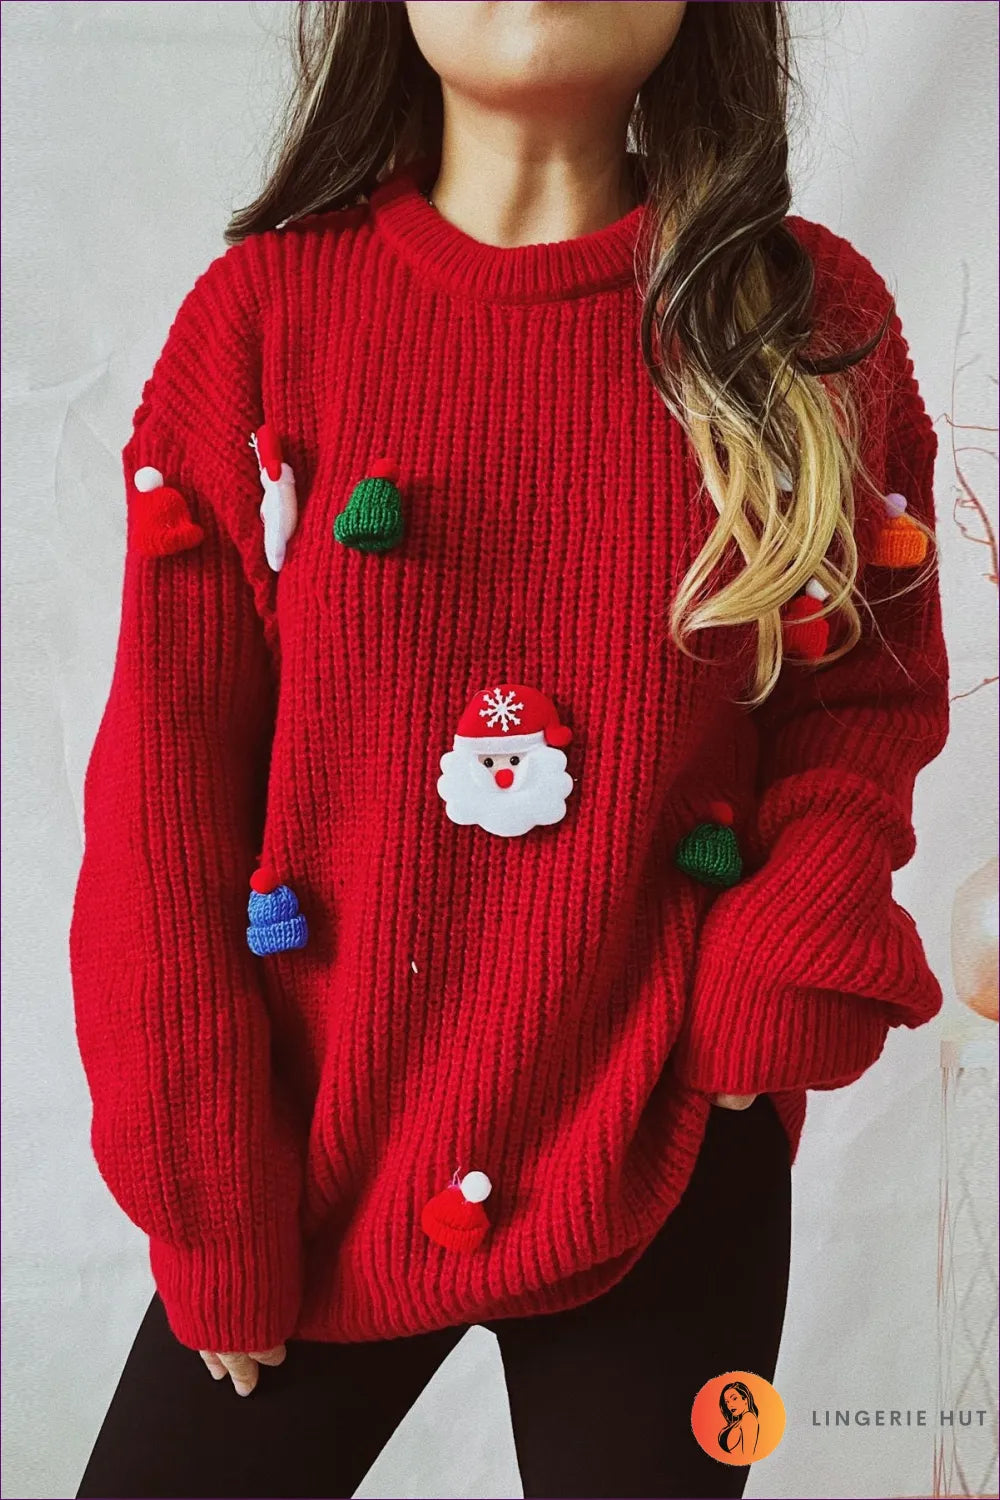 Step Into The Festive Season In Style With Lingerie Hut’s 3d Santa Claus Short Knitted Sweater. Loose Fit